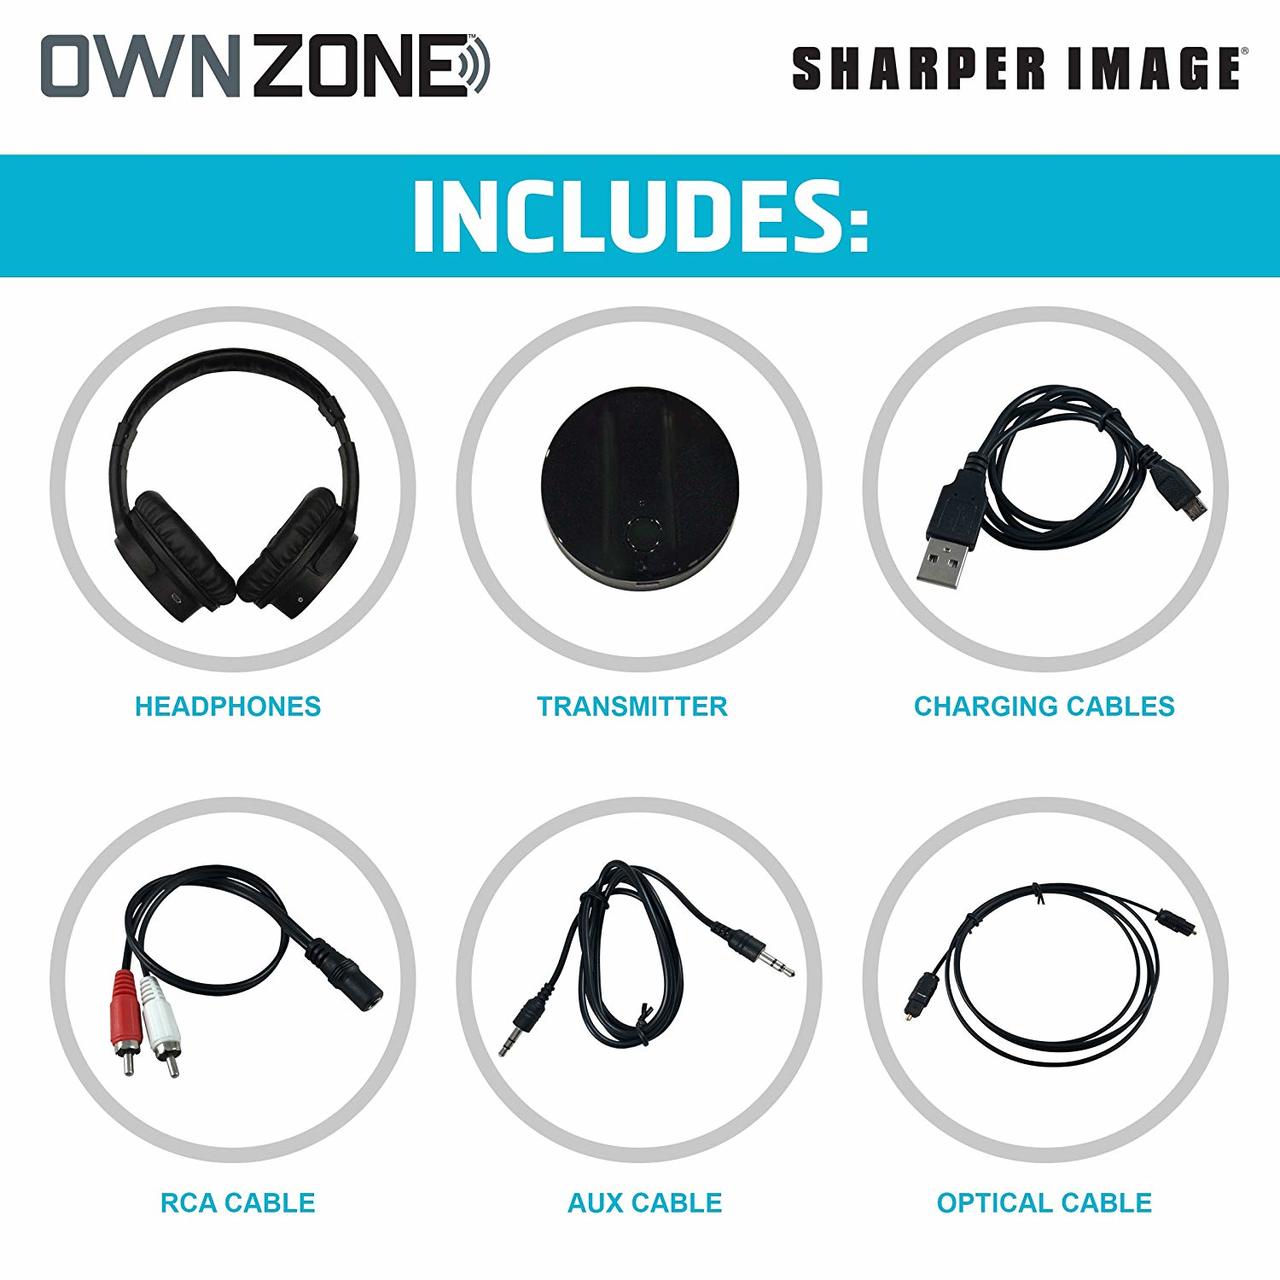 Sharper Image Own Zone DLX Wireless TV Headphones with Transmitter- Silver